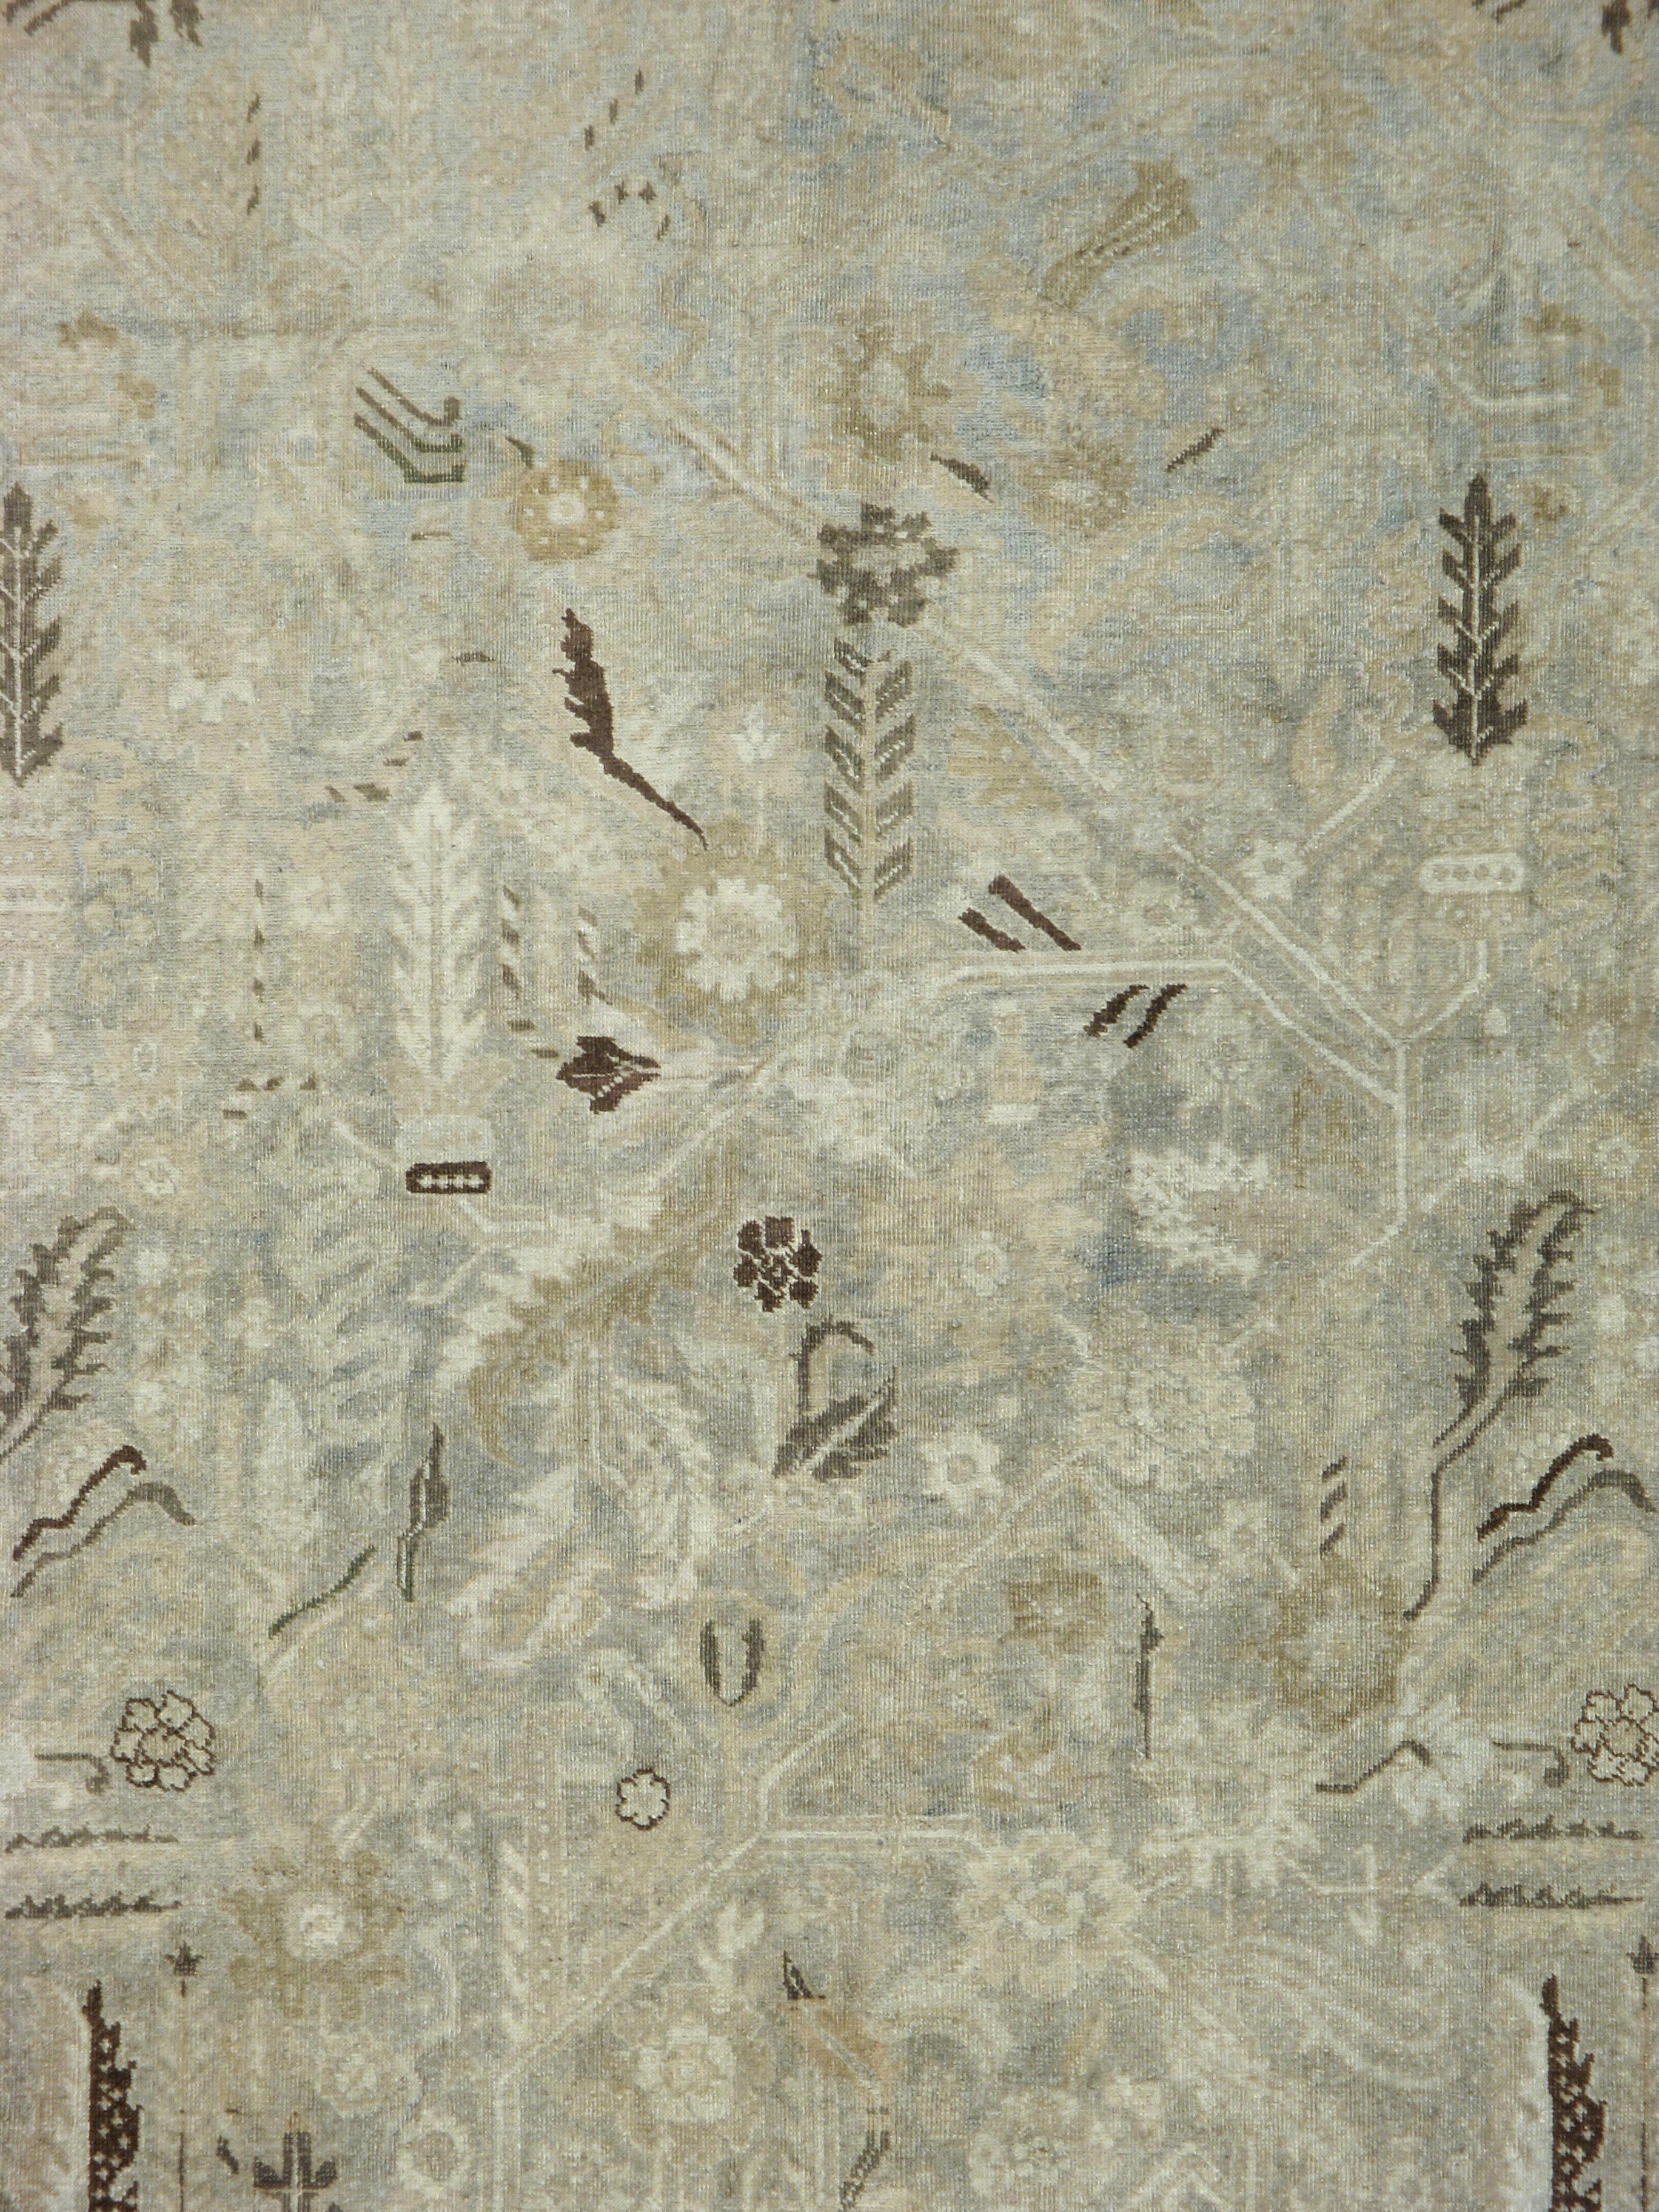 An antique Persian Tabriz carpet from the early 20th century with a luster that yields a muted appeal.

Measures: 10' 11